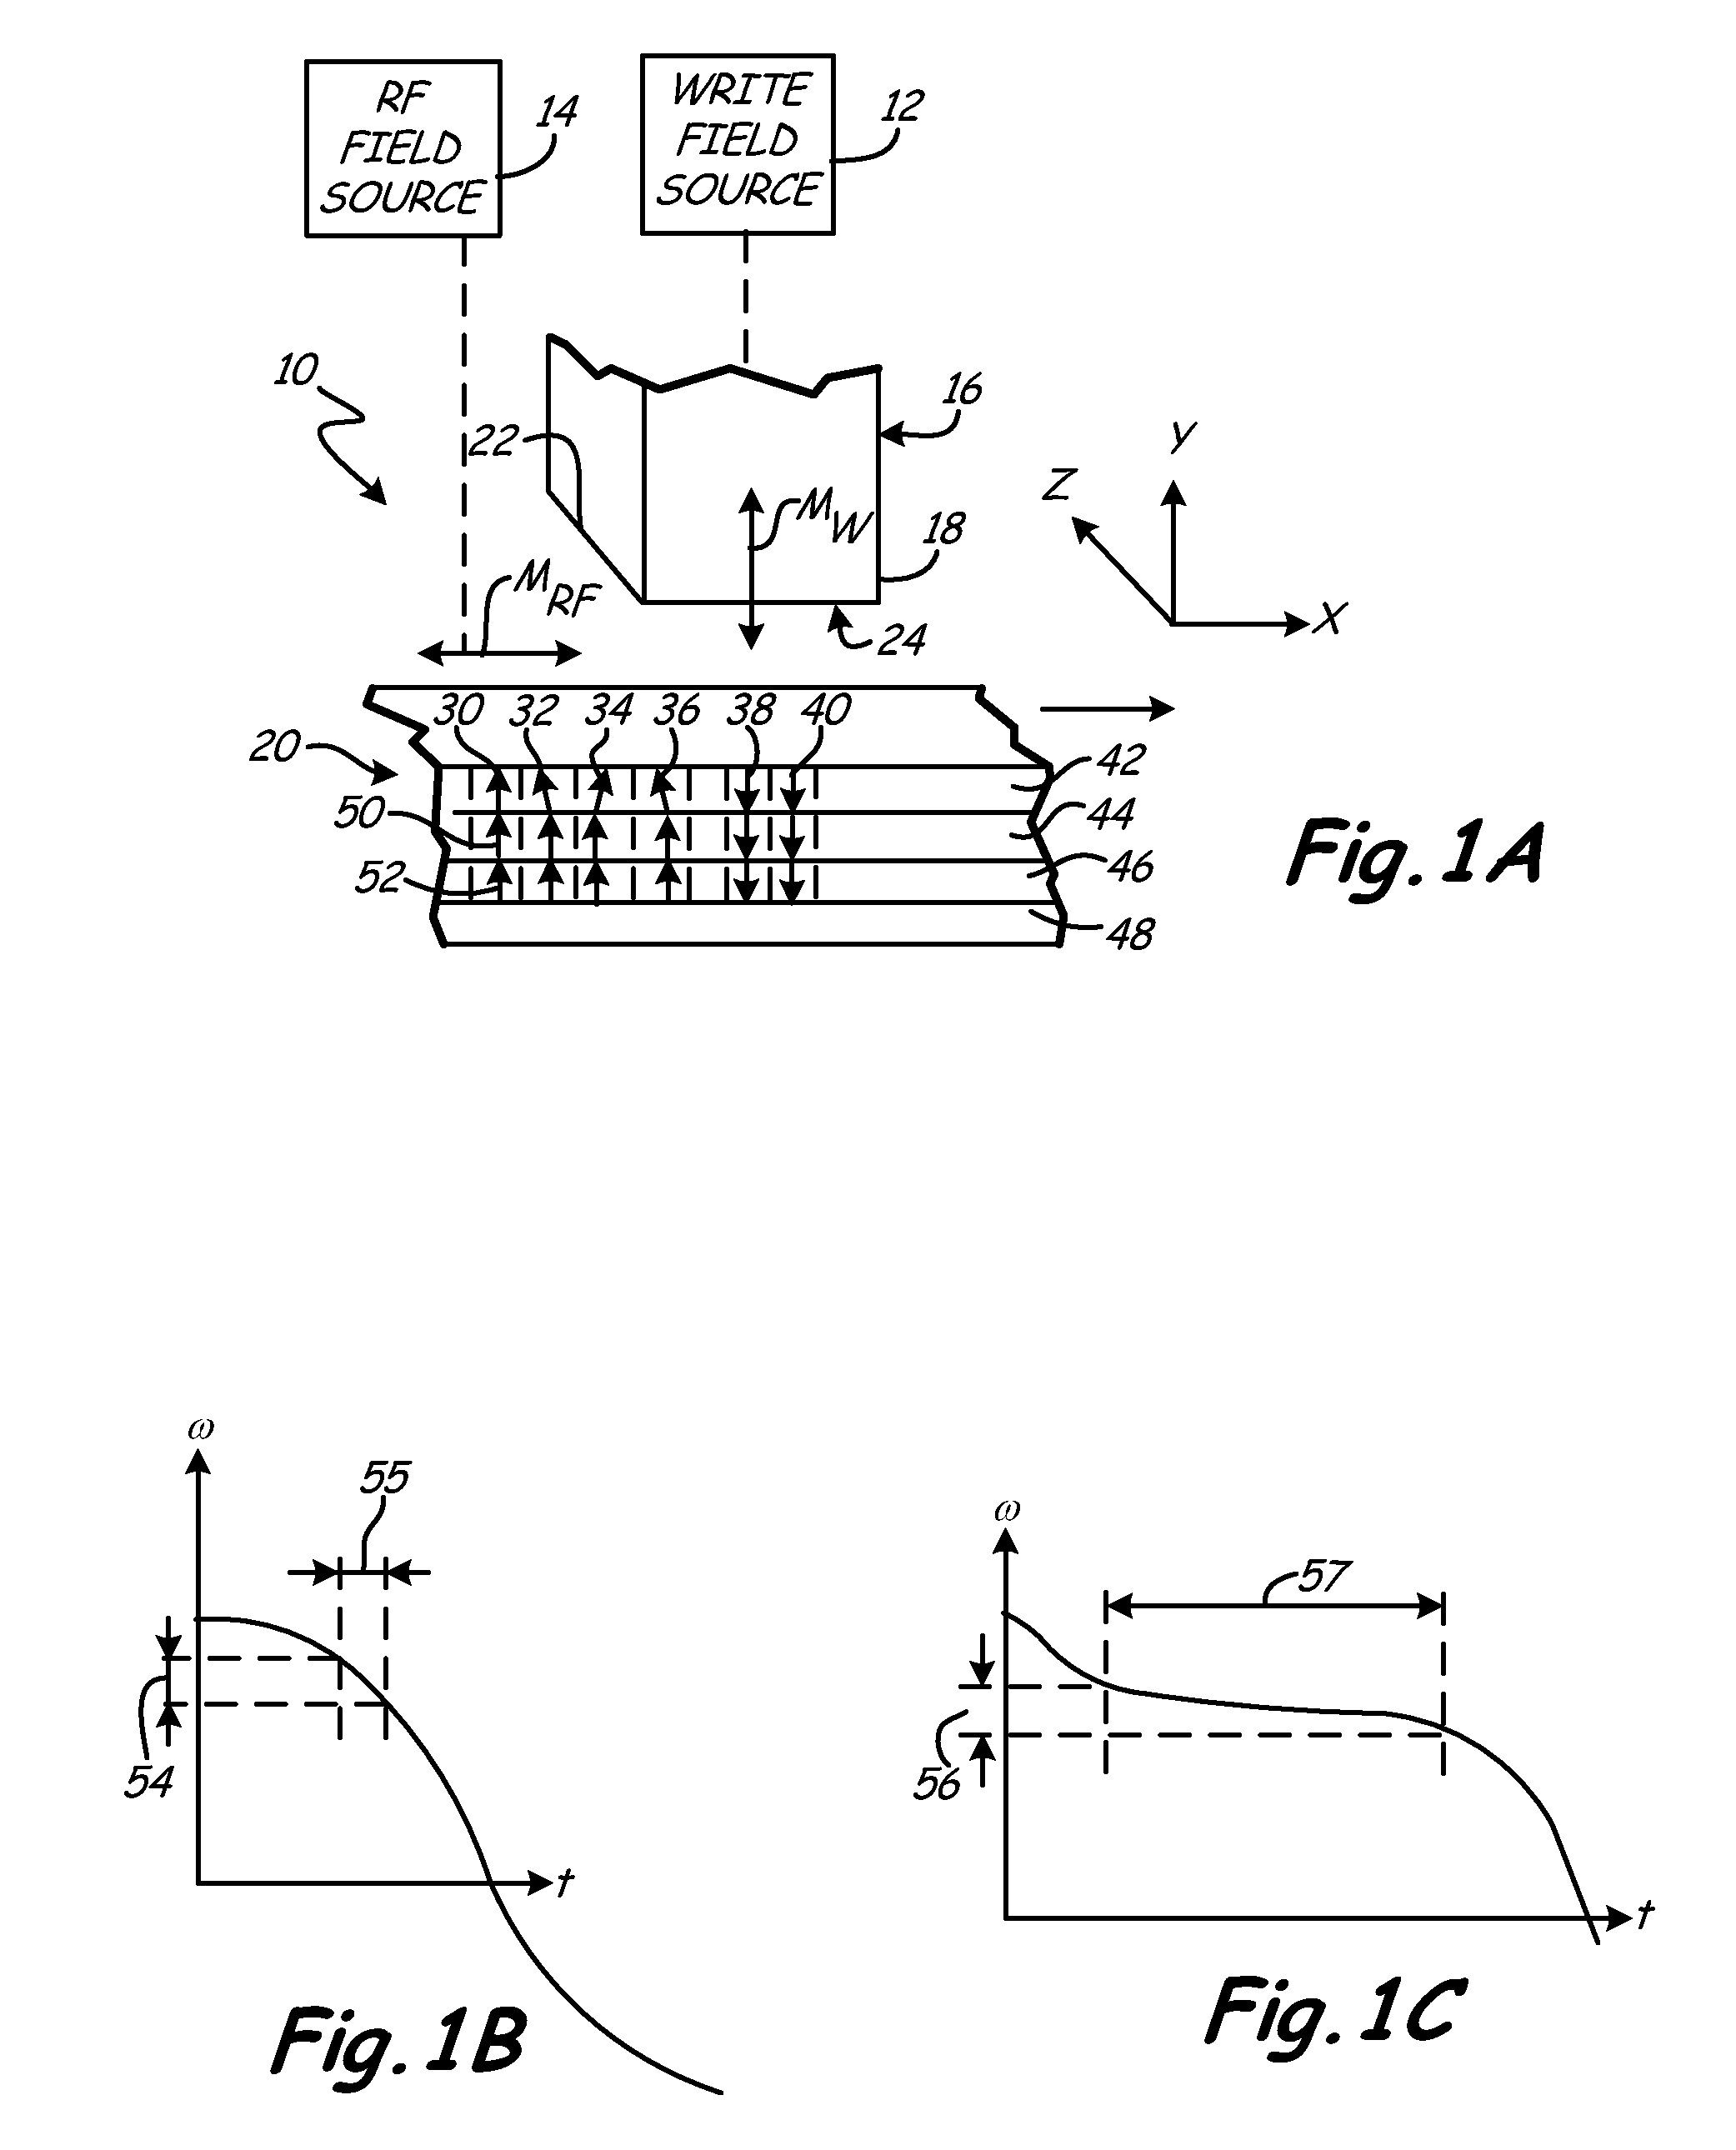 Microwave assisted magnetic recording system